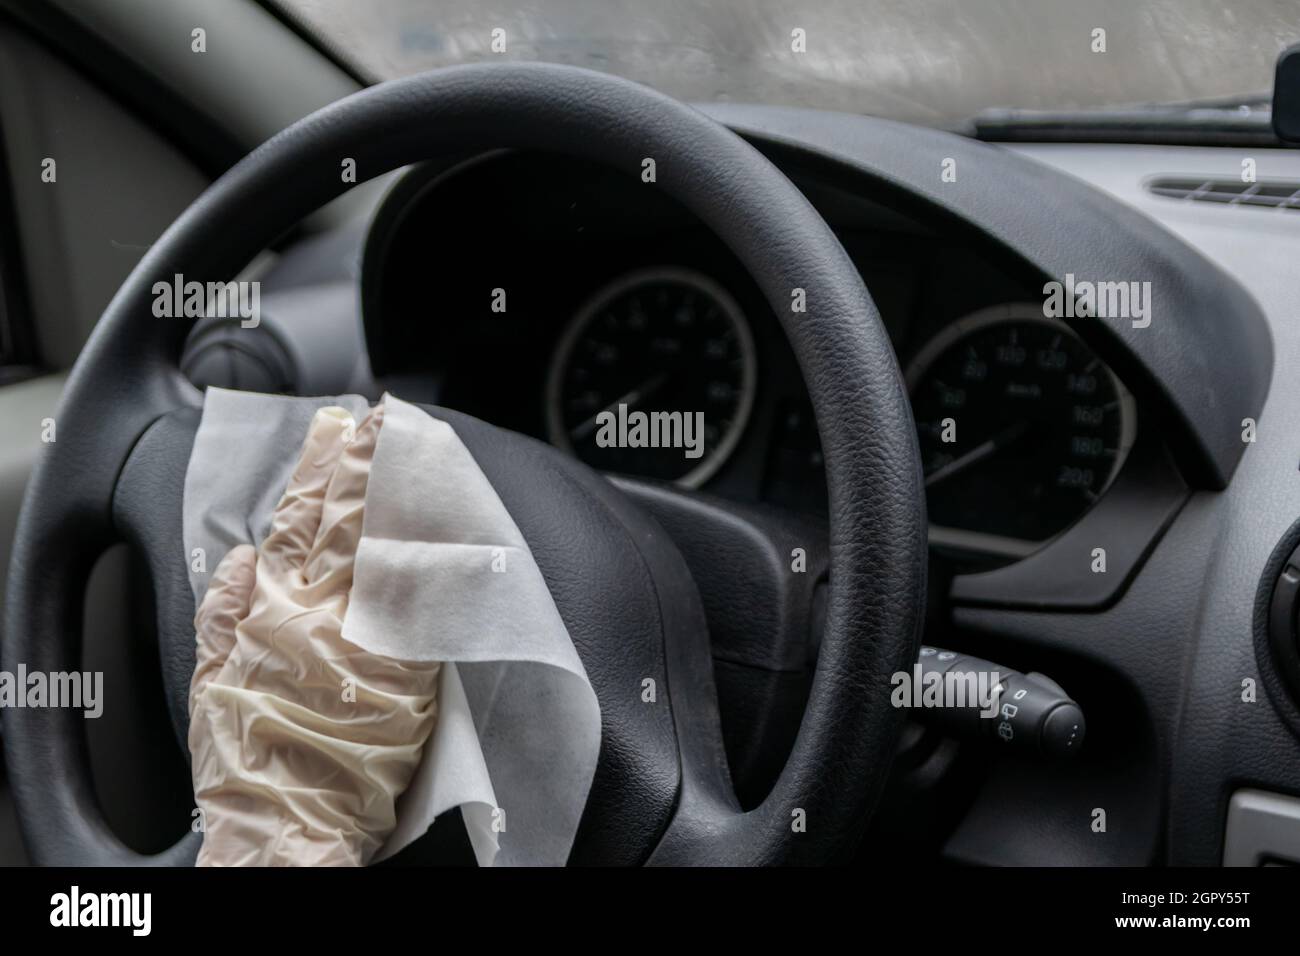 Child Hand In Rubber Glove Disinfects Car Cockpit As Infection Control And Infection Prevention Stock Photo